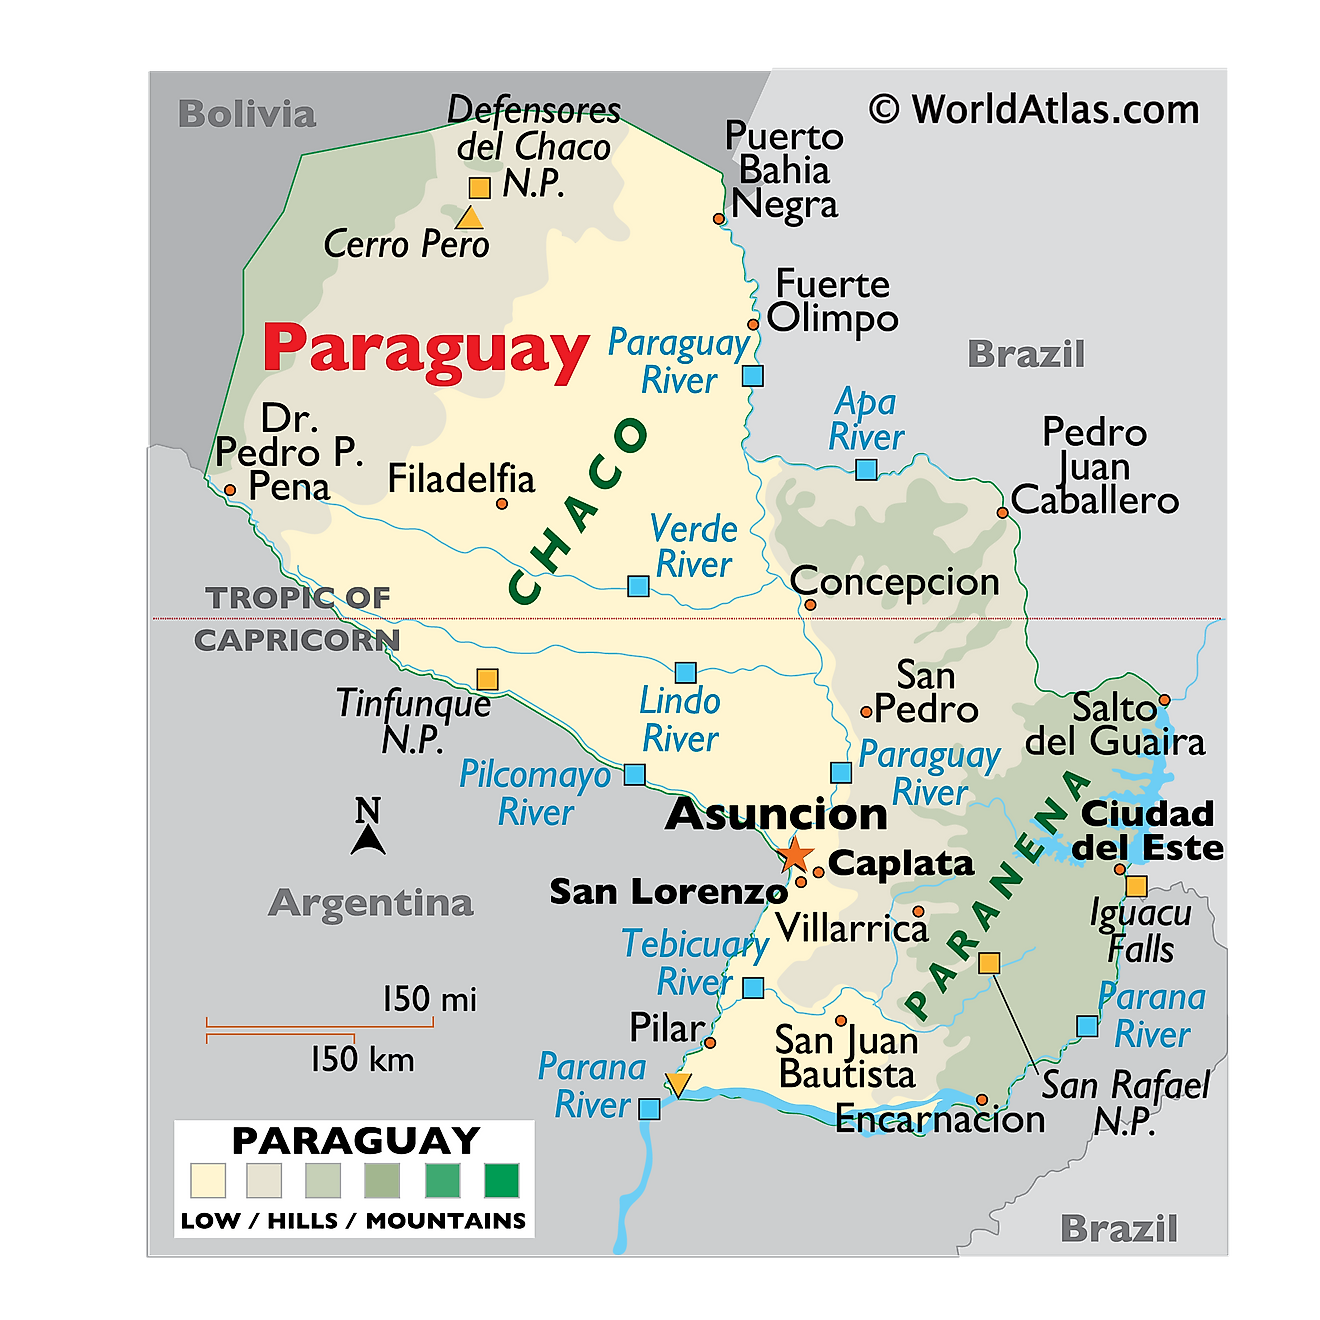 Physical Map of Paraguay showing relief, major rivers, geographical regions, protected areas, important settlements, bordering countries, etc.